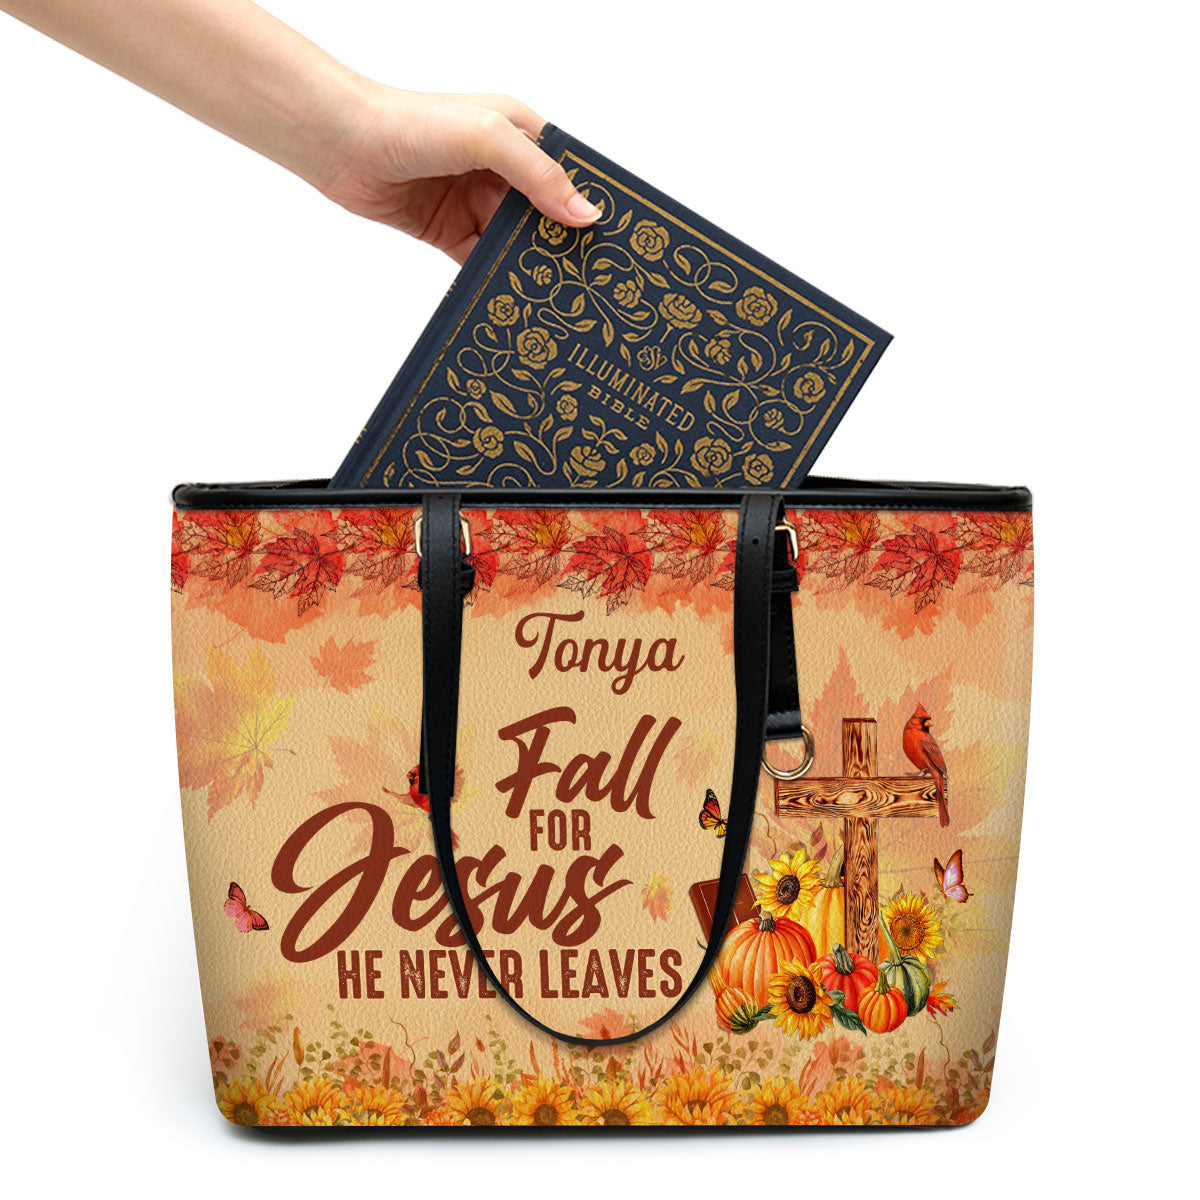 Autumn Season Bag Fall For Jesus He Never Leaves Personalized Large Leather Tote Bag - Christian Gifts For Women